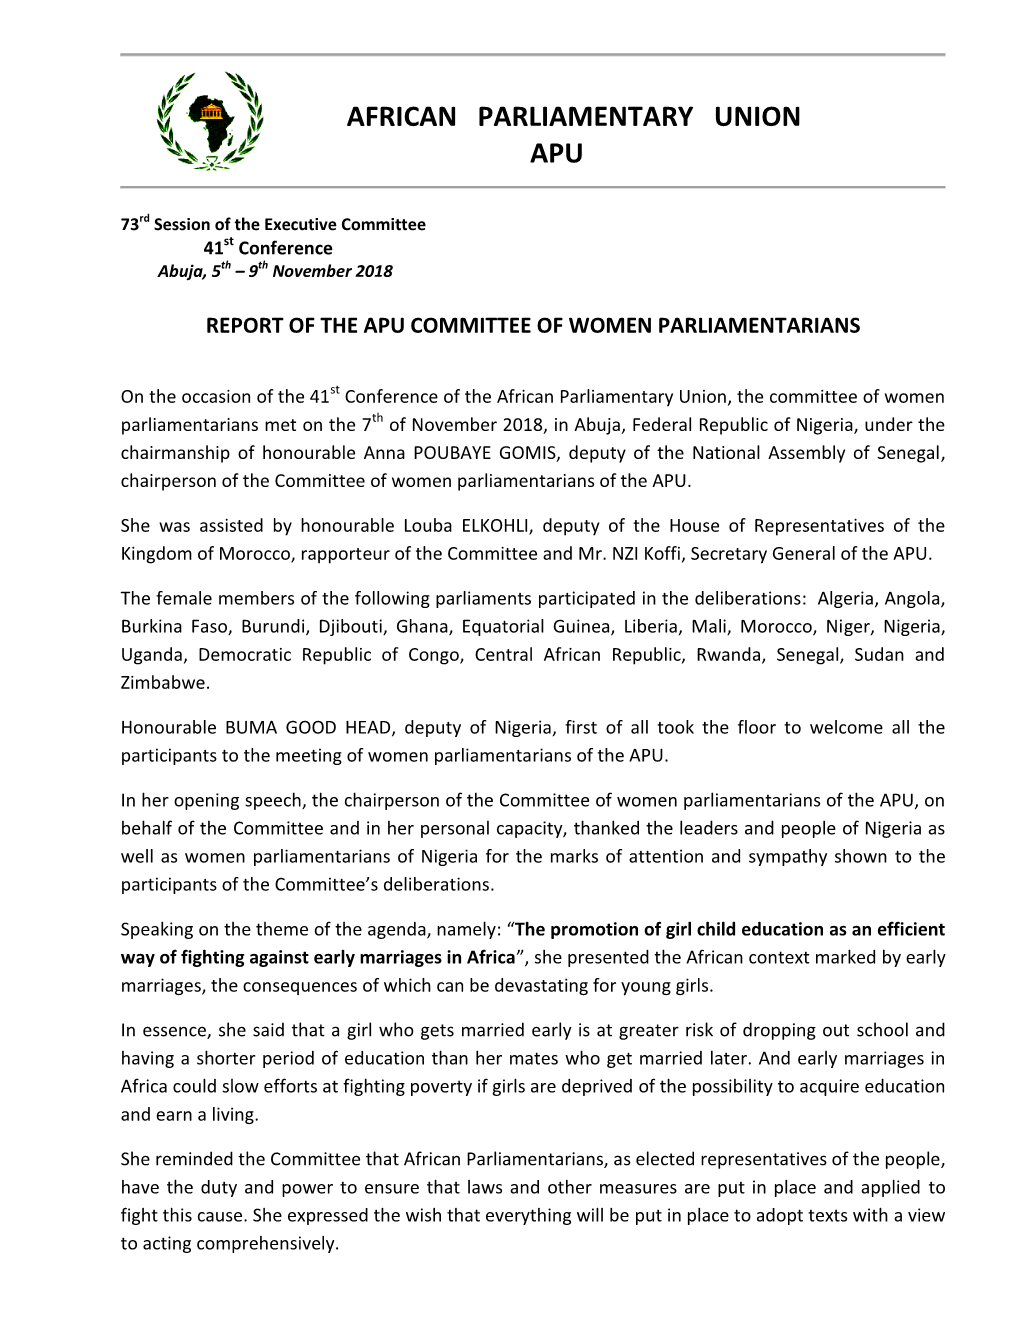 41St APU Conference , Abuja Nov. 2018 Report of the Committee of Women Parliamentarians